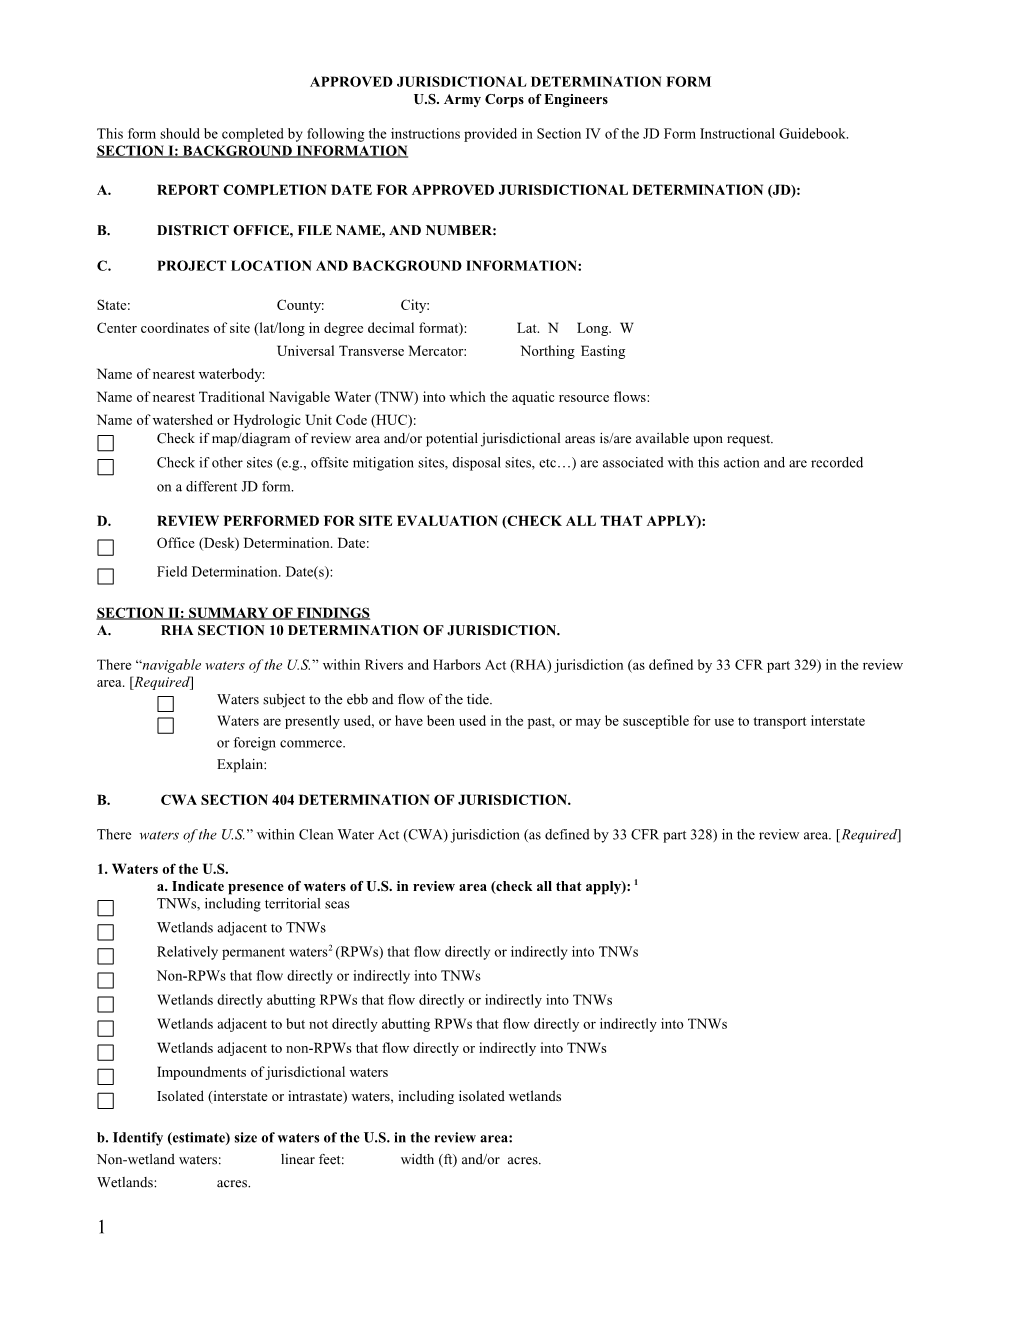 Approved Jurisdictional Determination Form s4